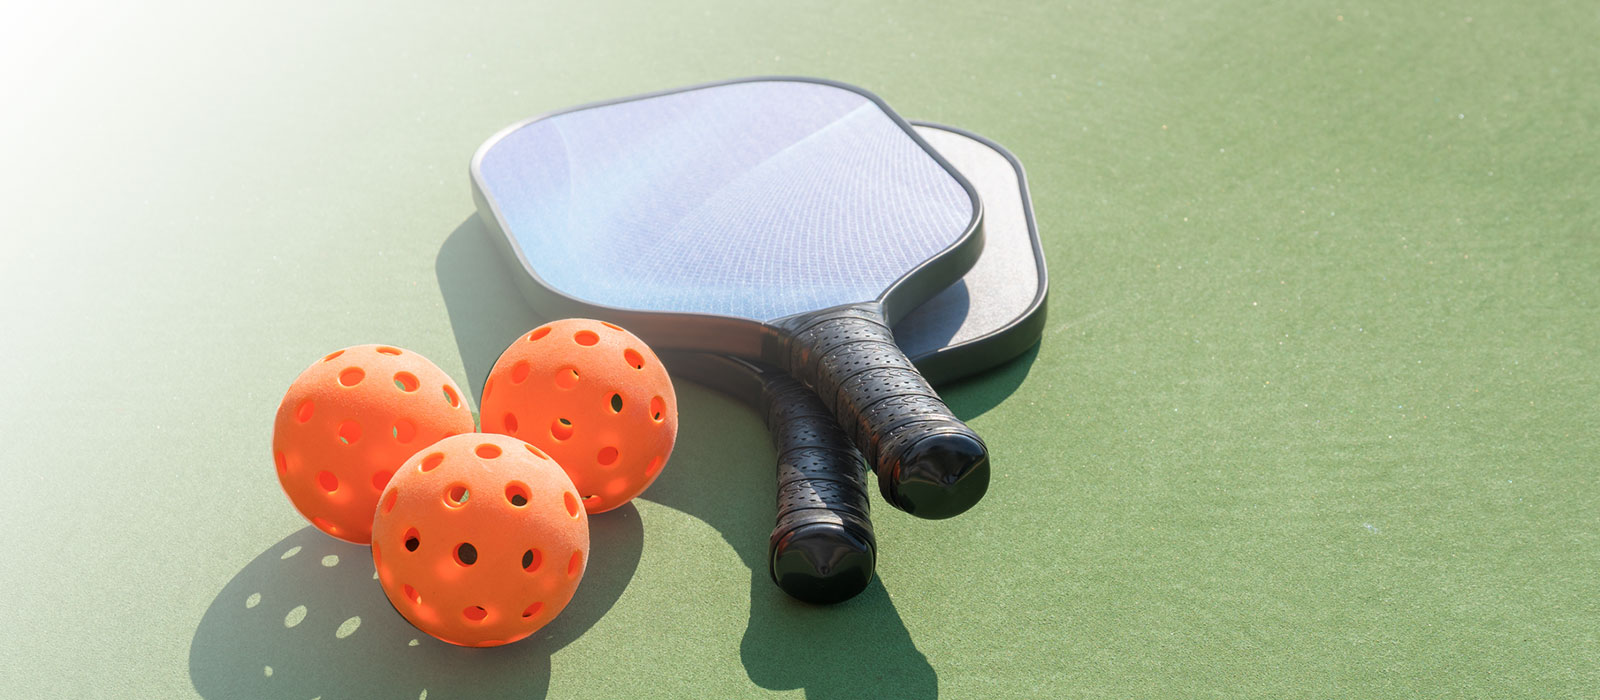 pickleball and racquets on court.